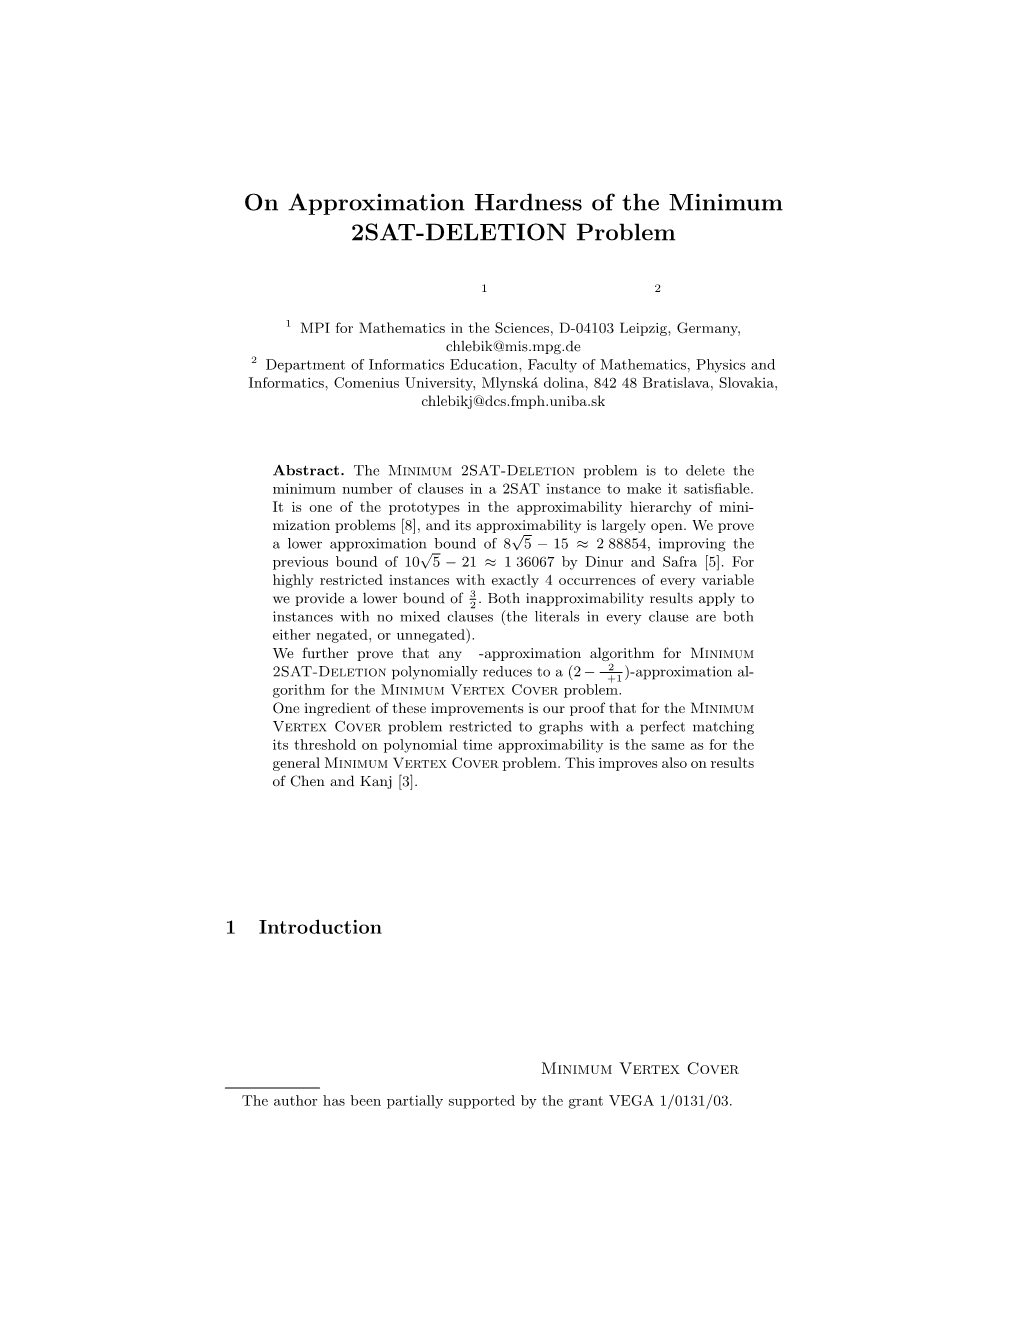 On Approximation Hardness of the Minimum 2SAT-DELETION Problem